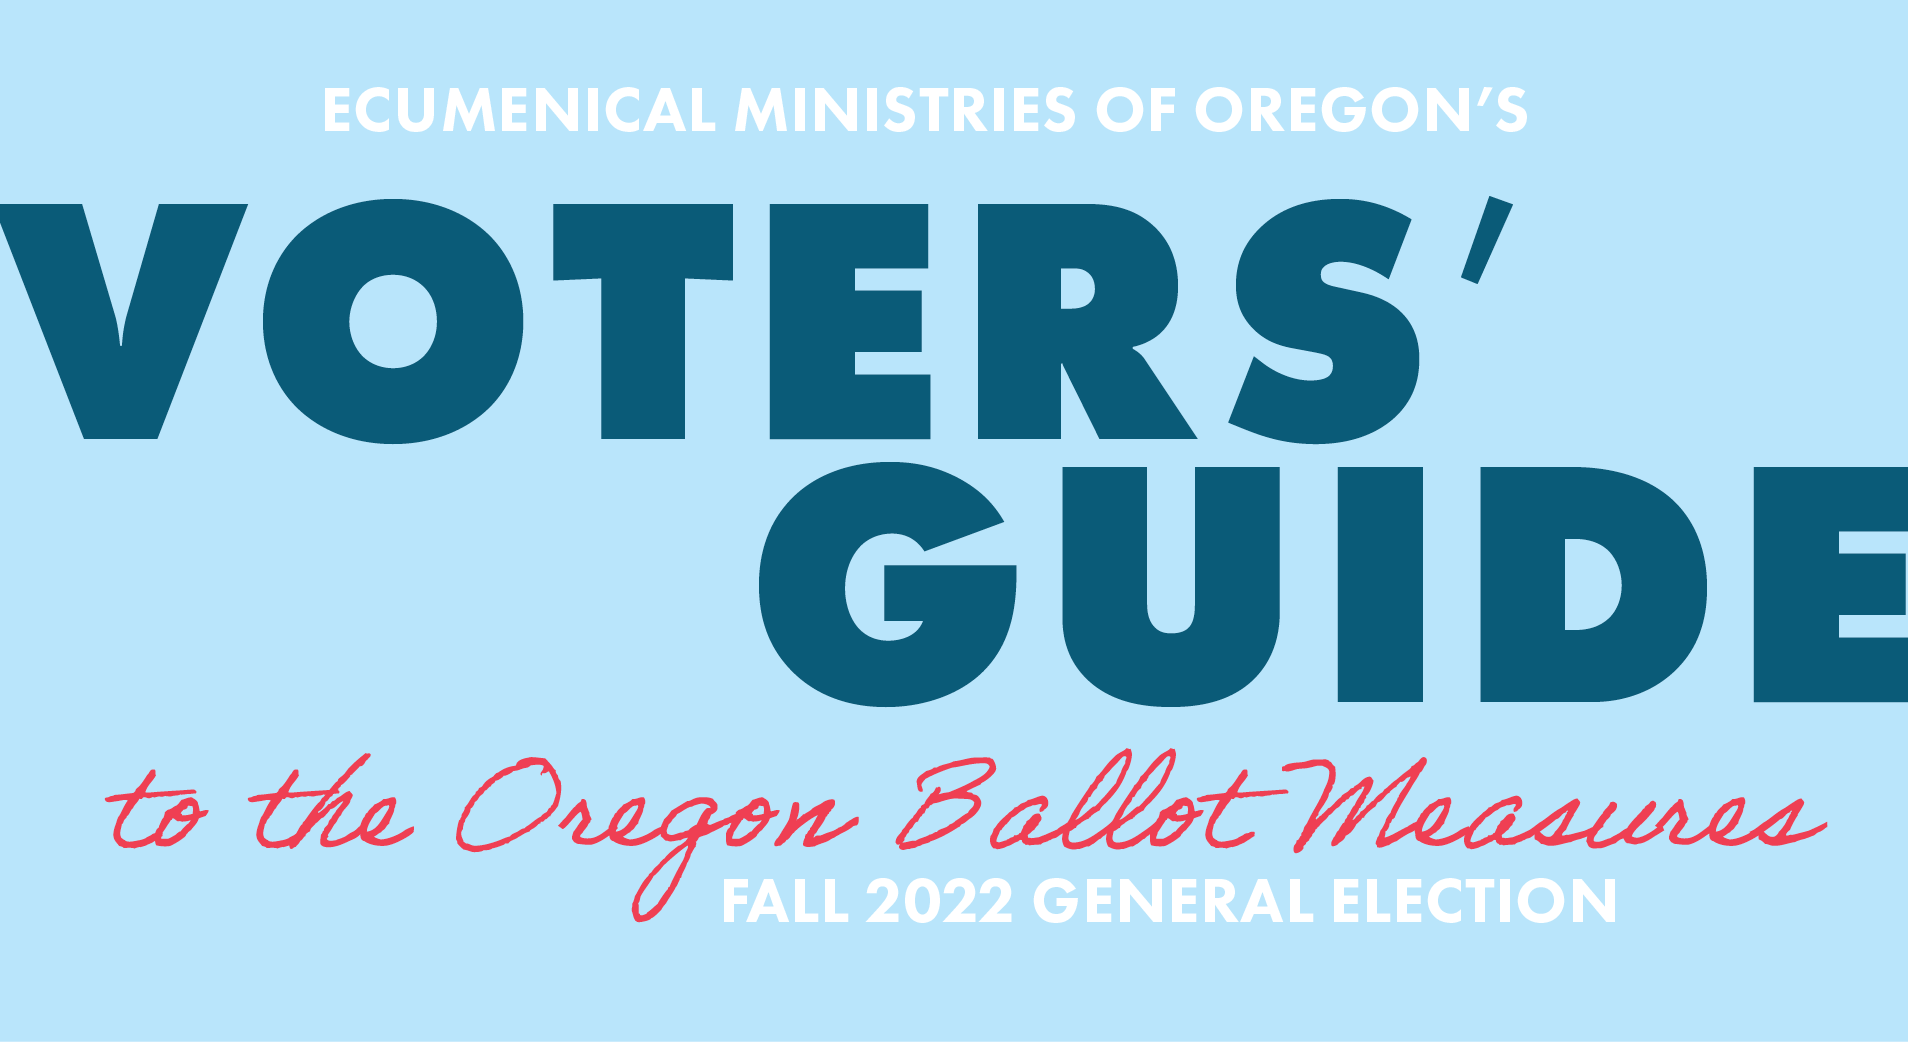 Voters’ Guide to Oregon Ballot Measures